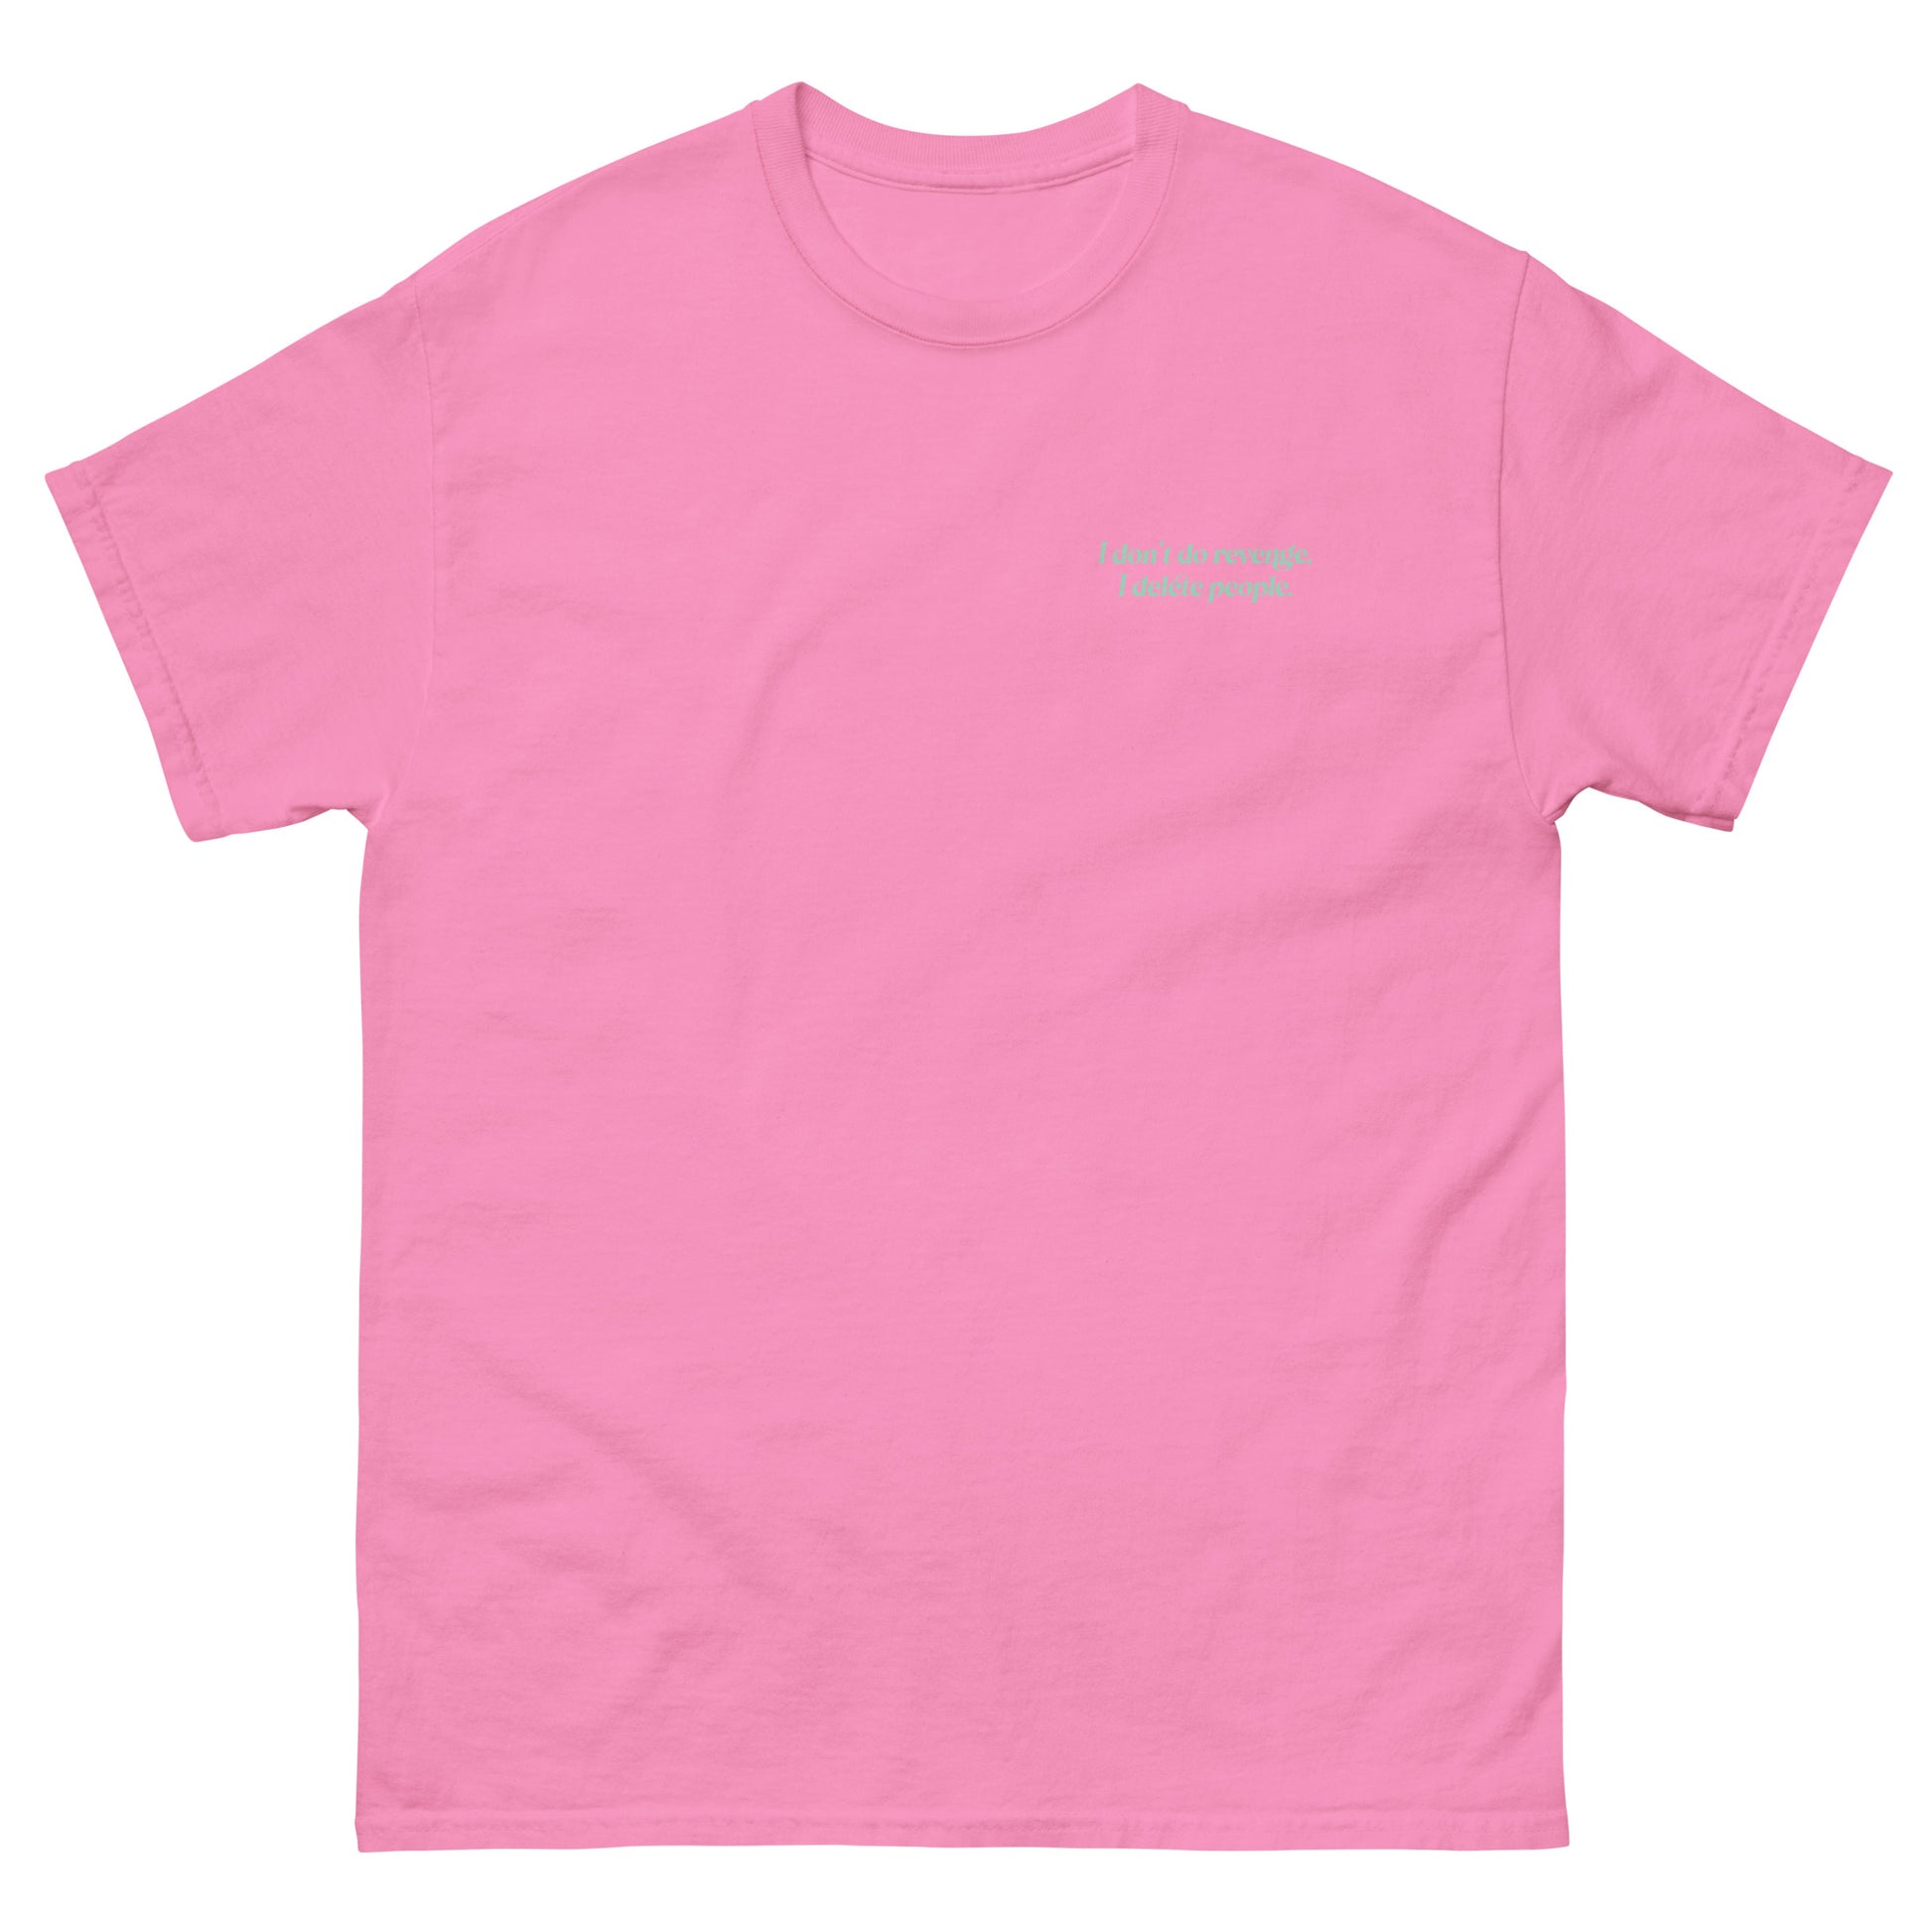 Pink High Quality Tee - Front Design with "I don't do revenge, I delete people. " print on left chest - Back Design with a Phrase "I don't do revenge, I delete people." print